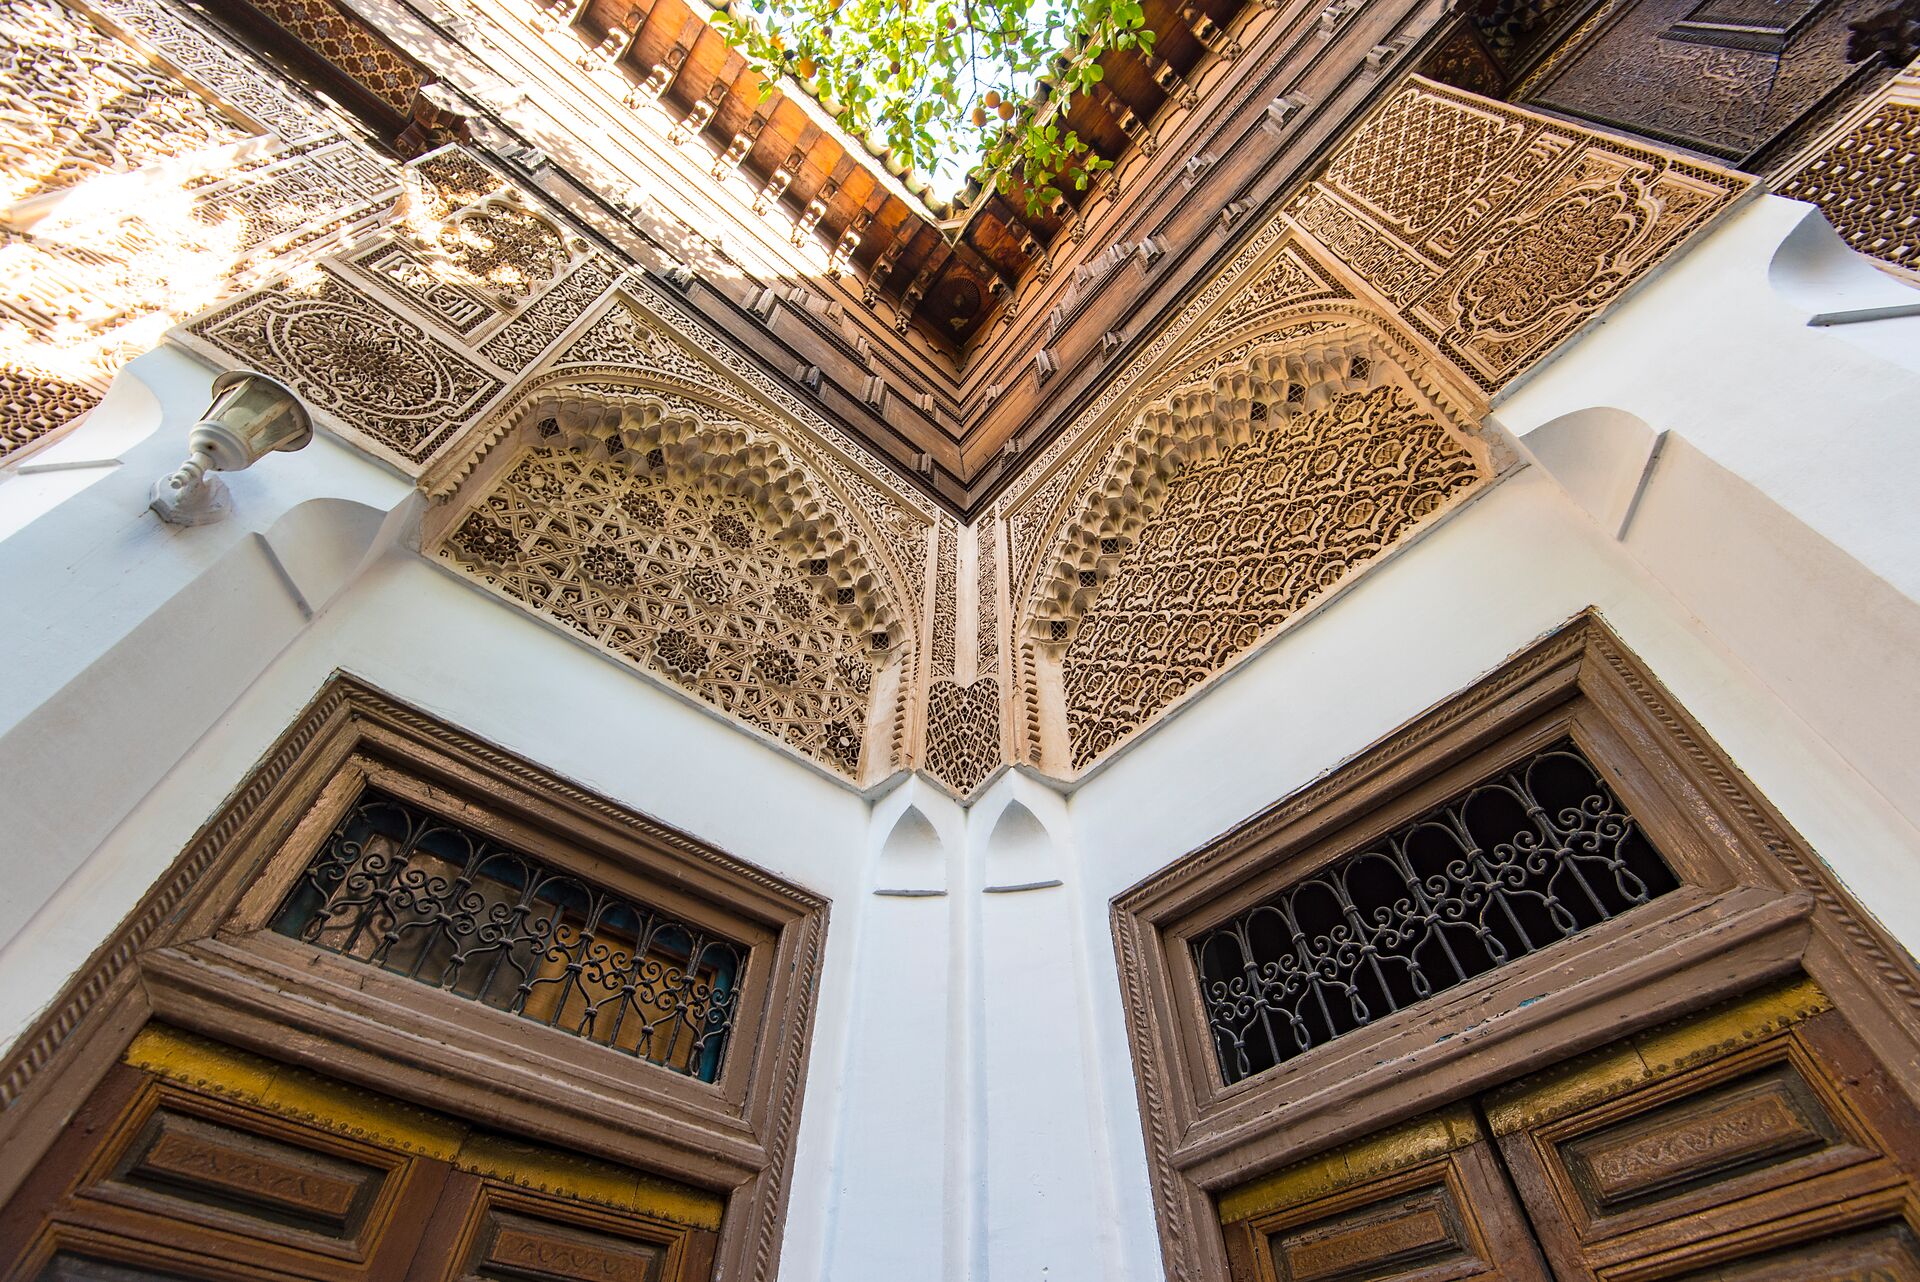 a view looking up at ornate wooden trelliswork and red roof tiles of the Bahia Palace in Morocco